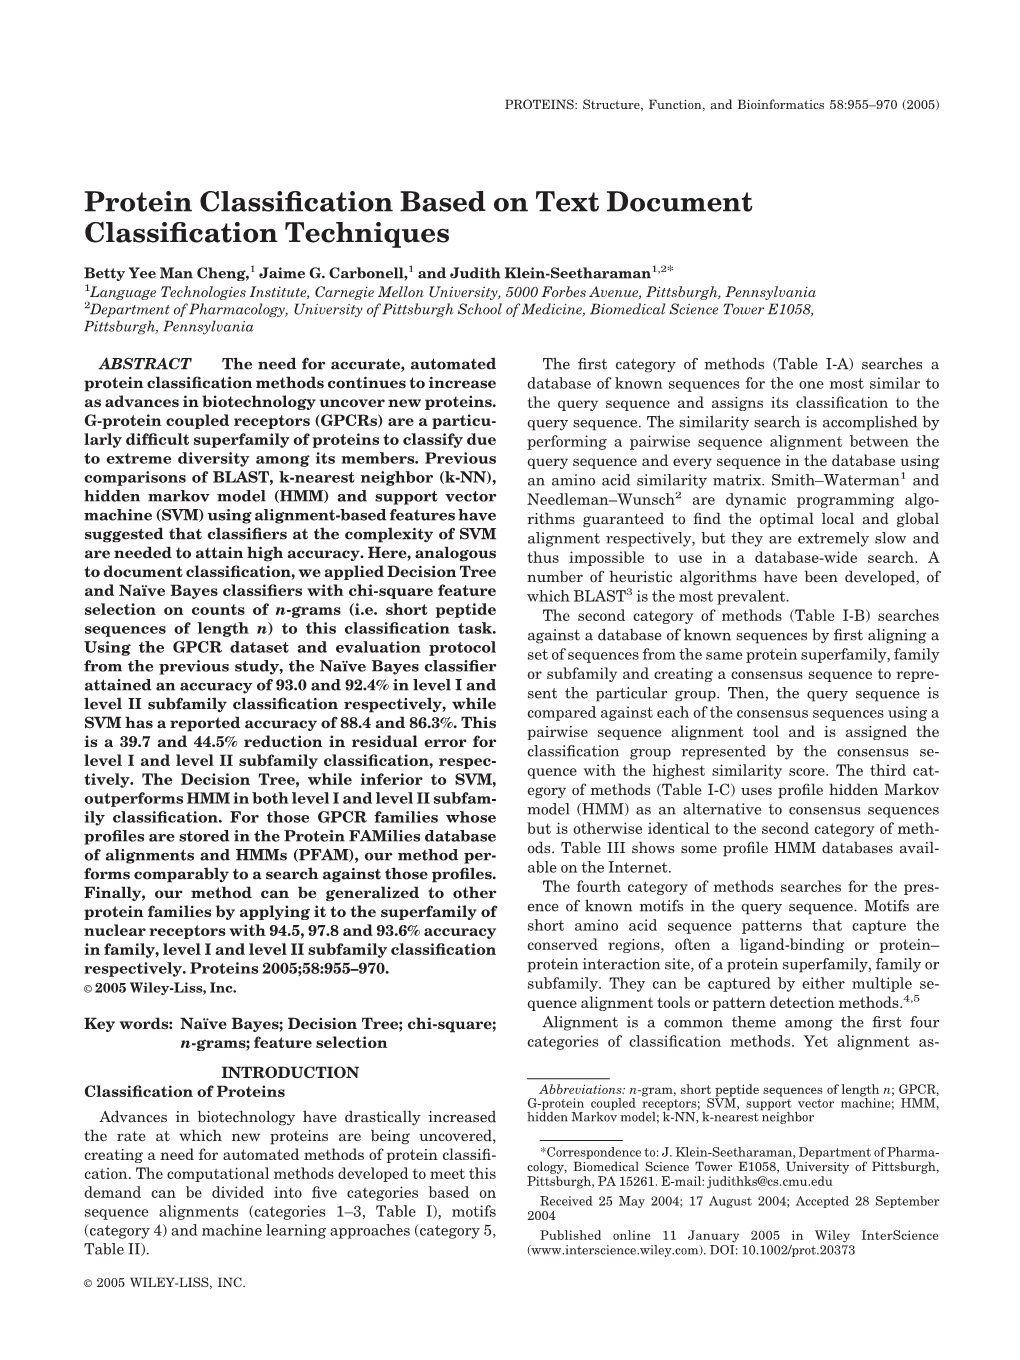 Protein Classification Based on Text Document Classification Techniques